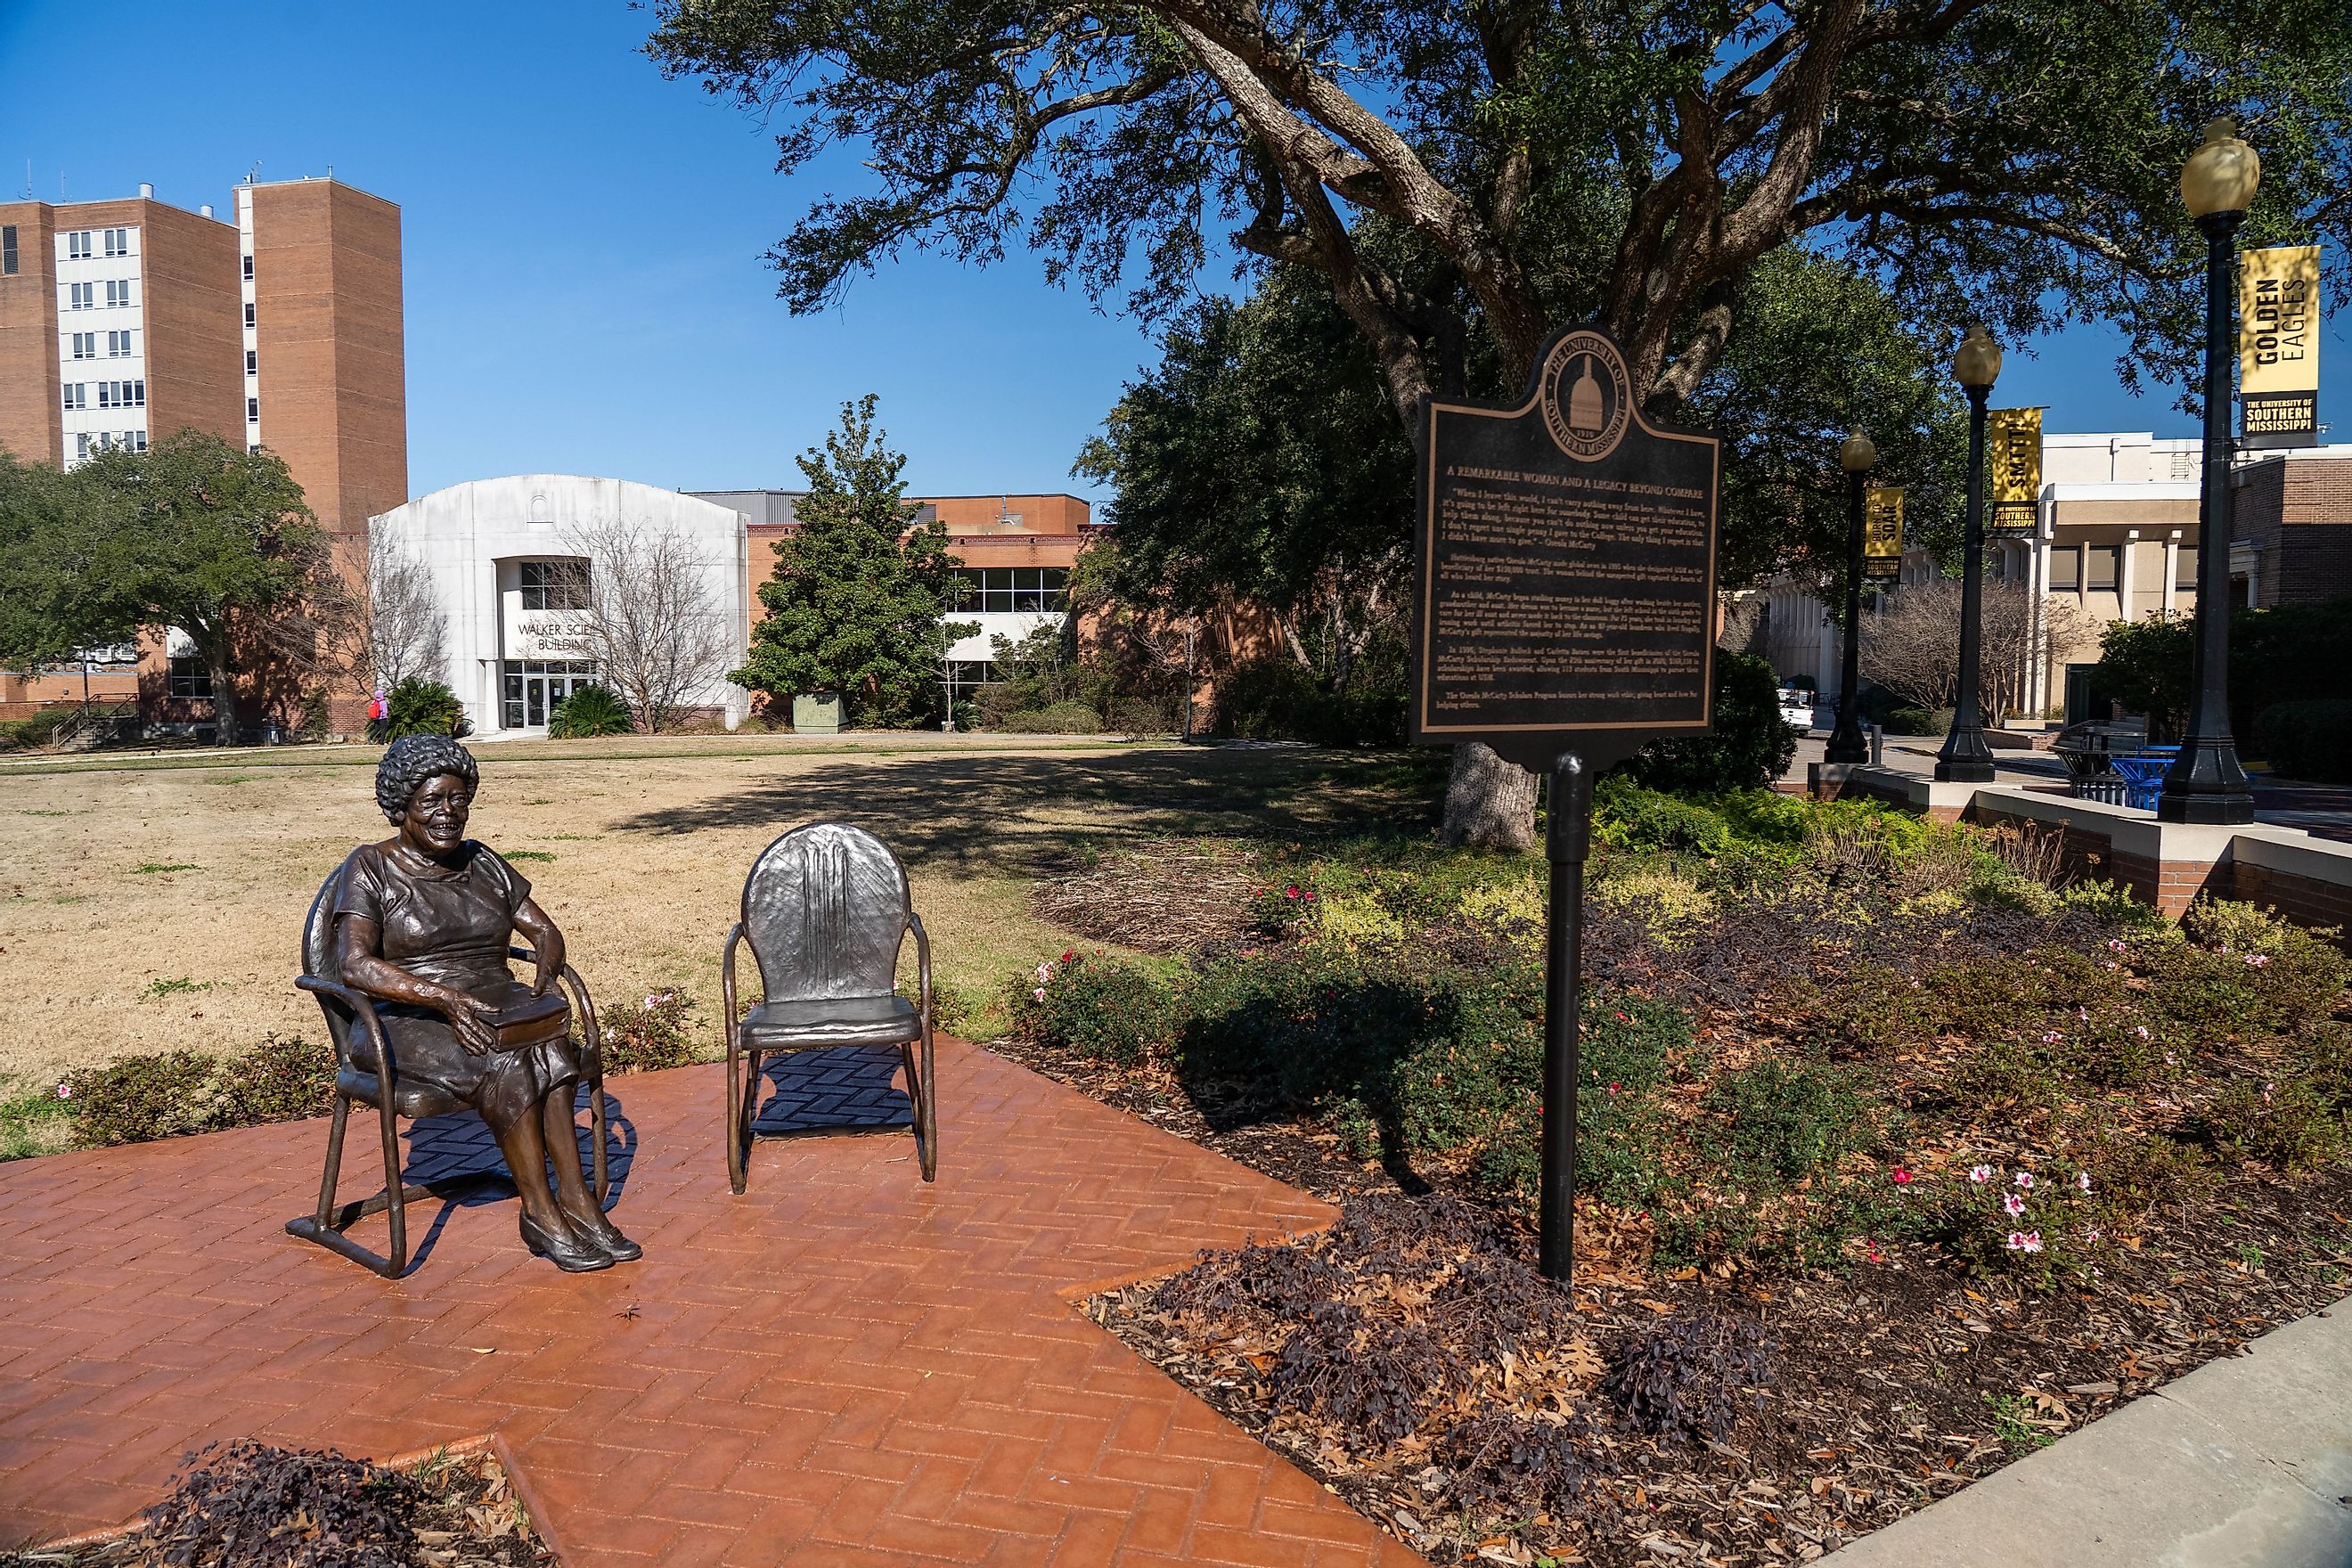 Monument to Oseola McCarty on the campus of the University of Southern Mississippi in Hattiesburg, Mississippi. Editorial credit: Stephen Reeves / Shutterstock.com.